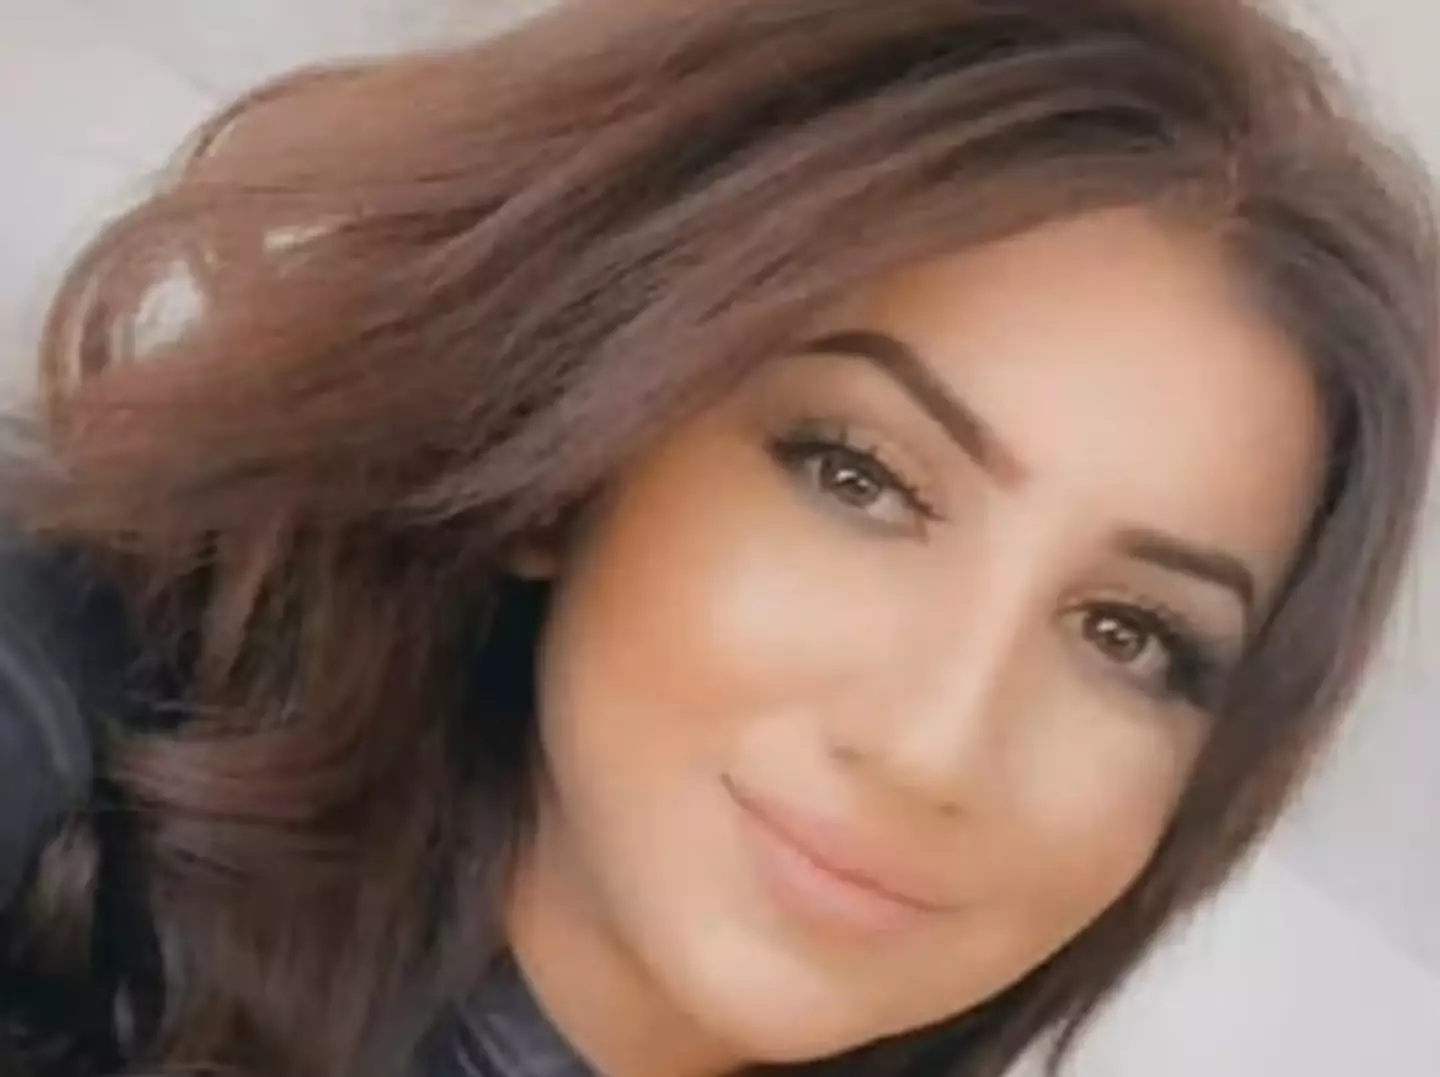 Shahraban K is accused of murdering an influencer who looked like her to fake her death.